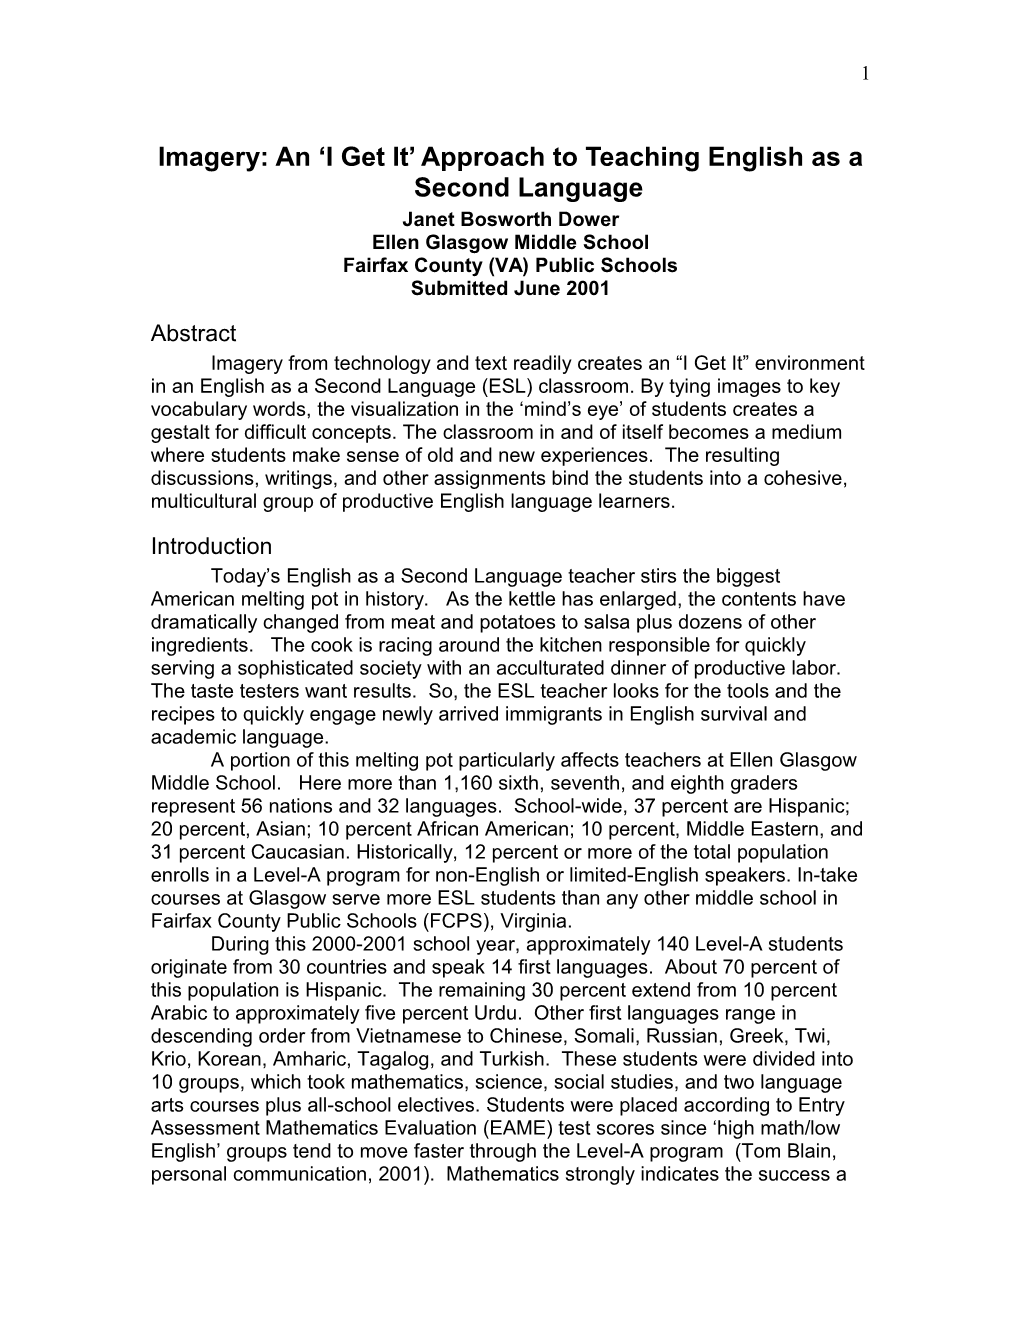 Imagery—An ‘I Get It’ Approach To Teaching English As A Second Language